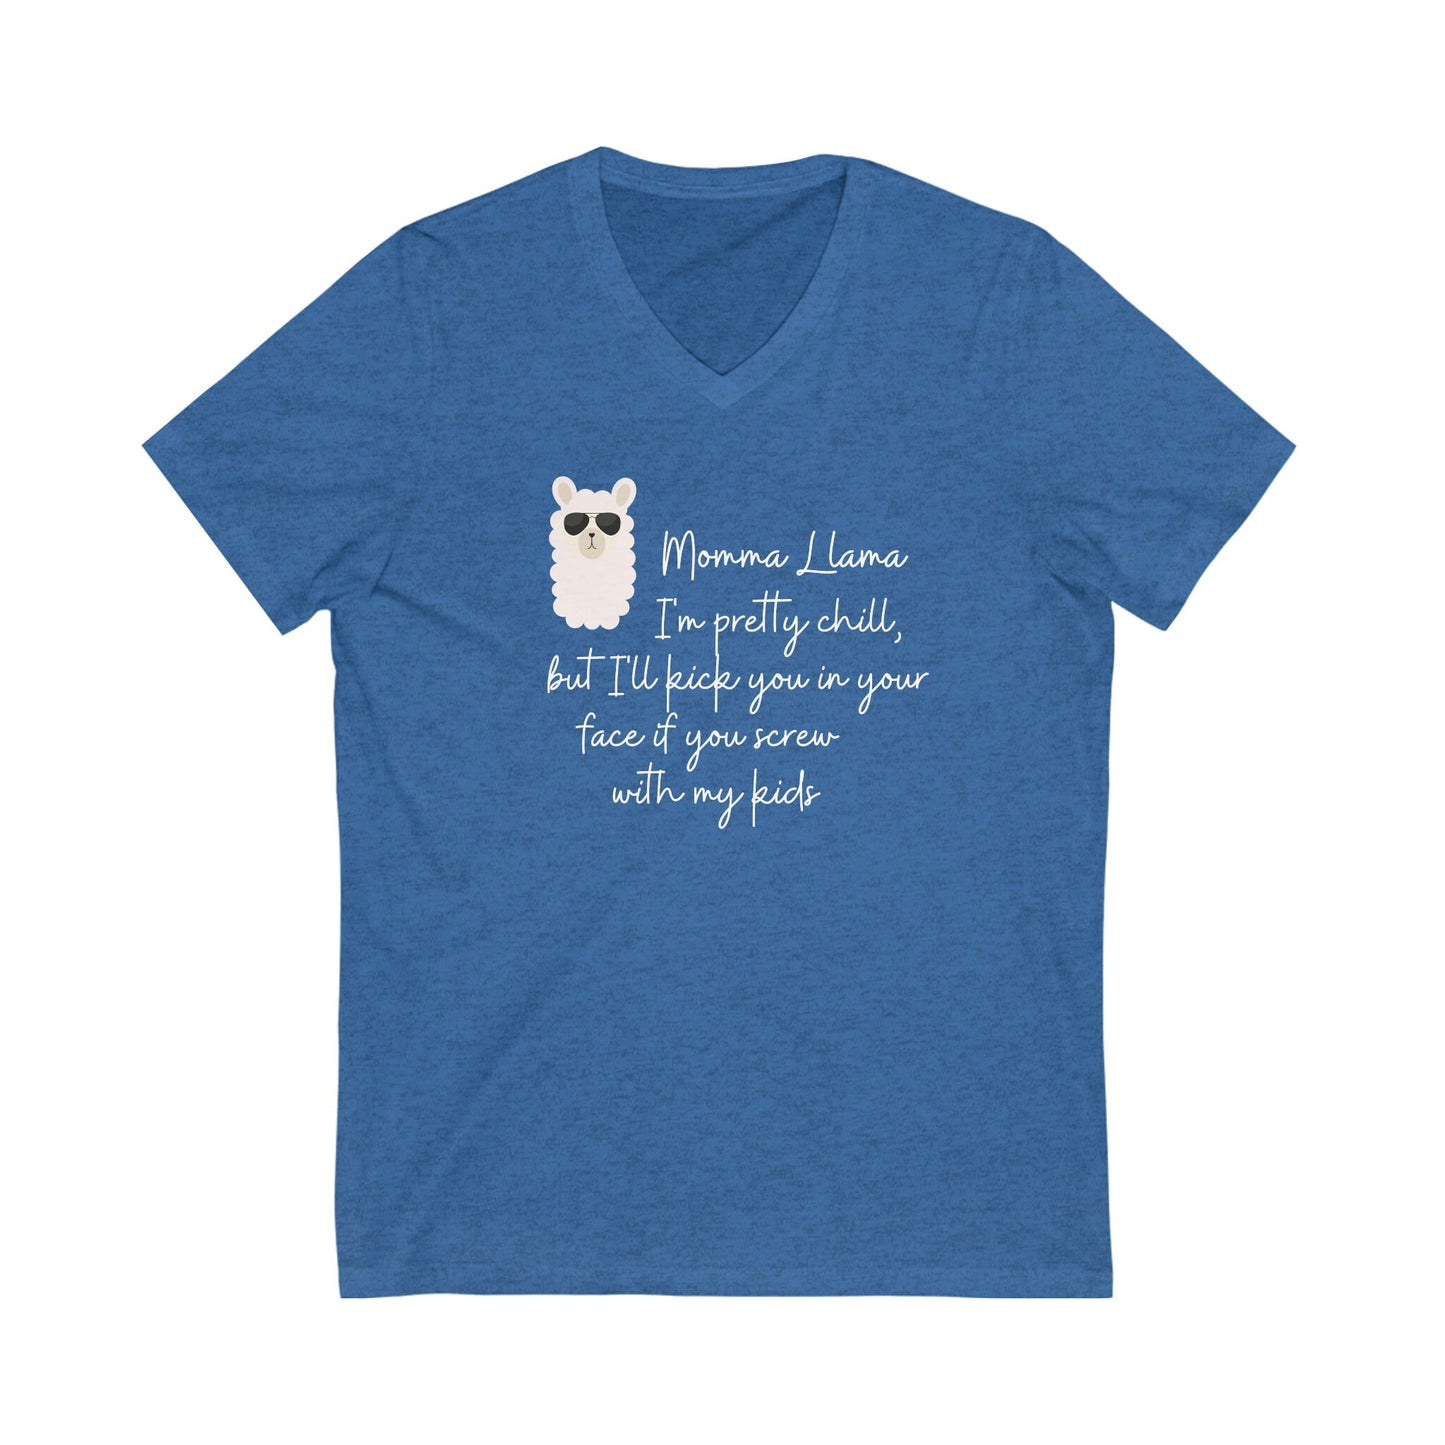 Momma Llama Jersey Short Sleeve V-Neck Tee - Extended sizes - Choice of colors